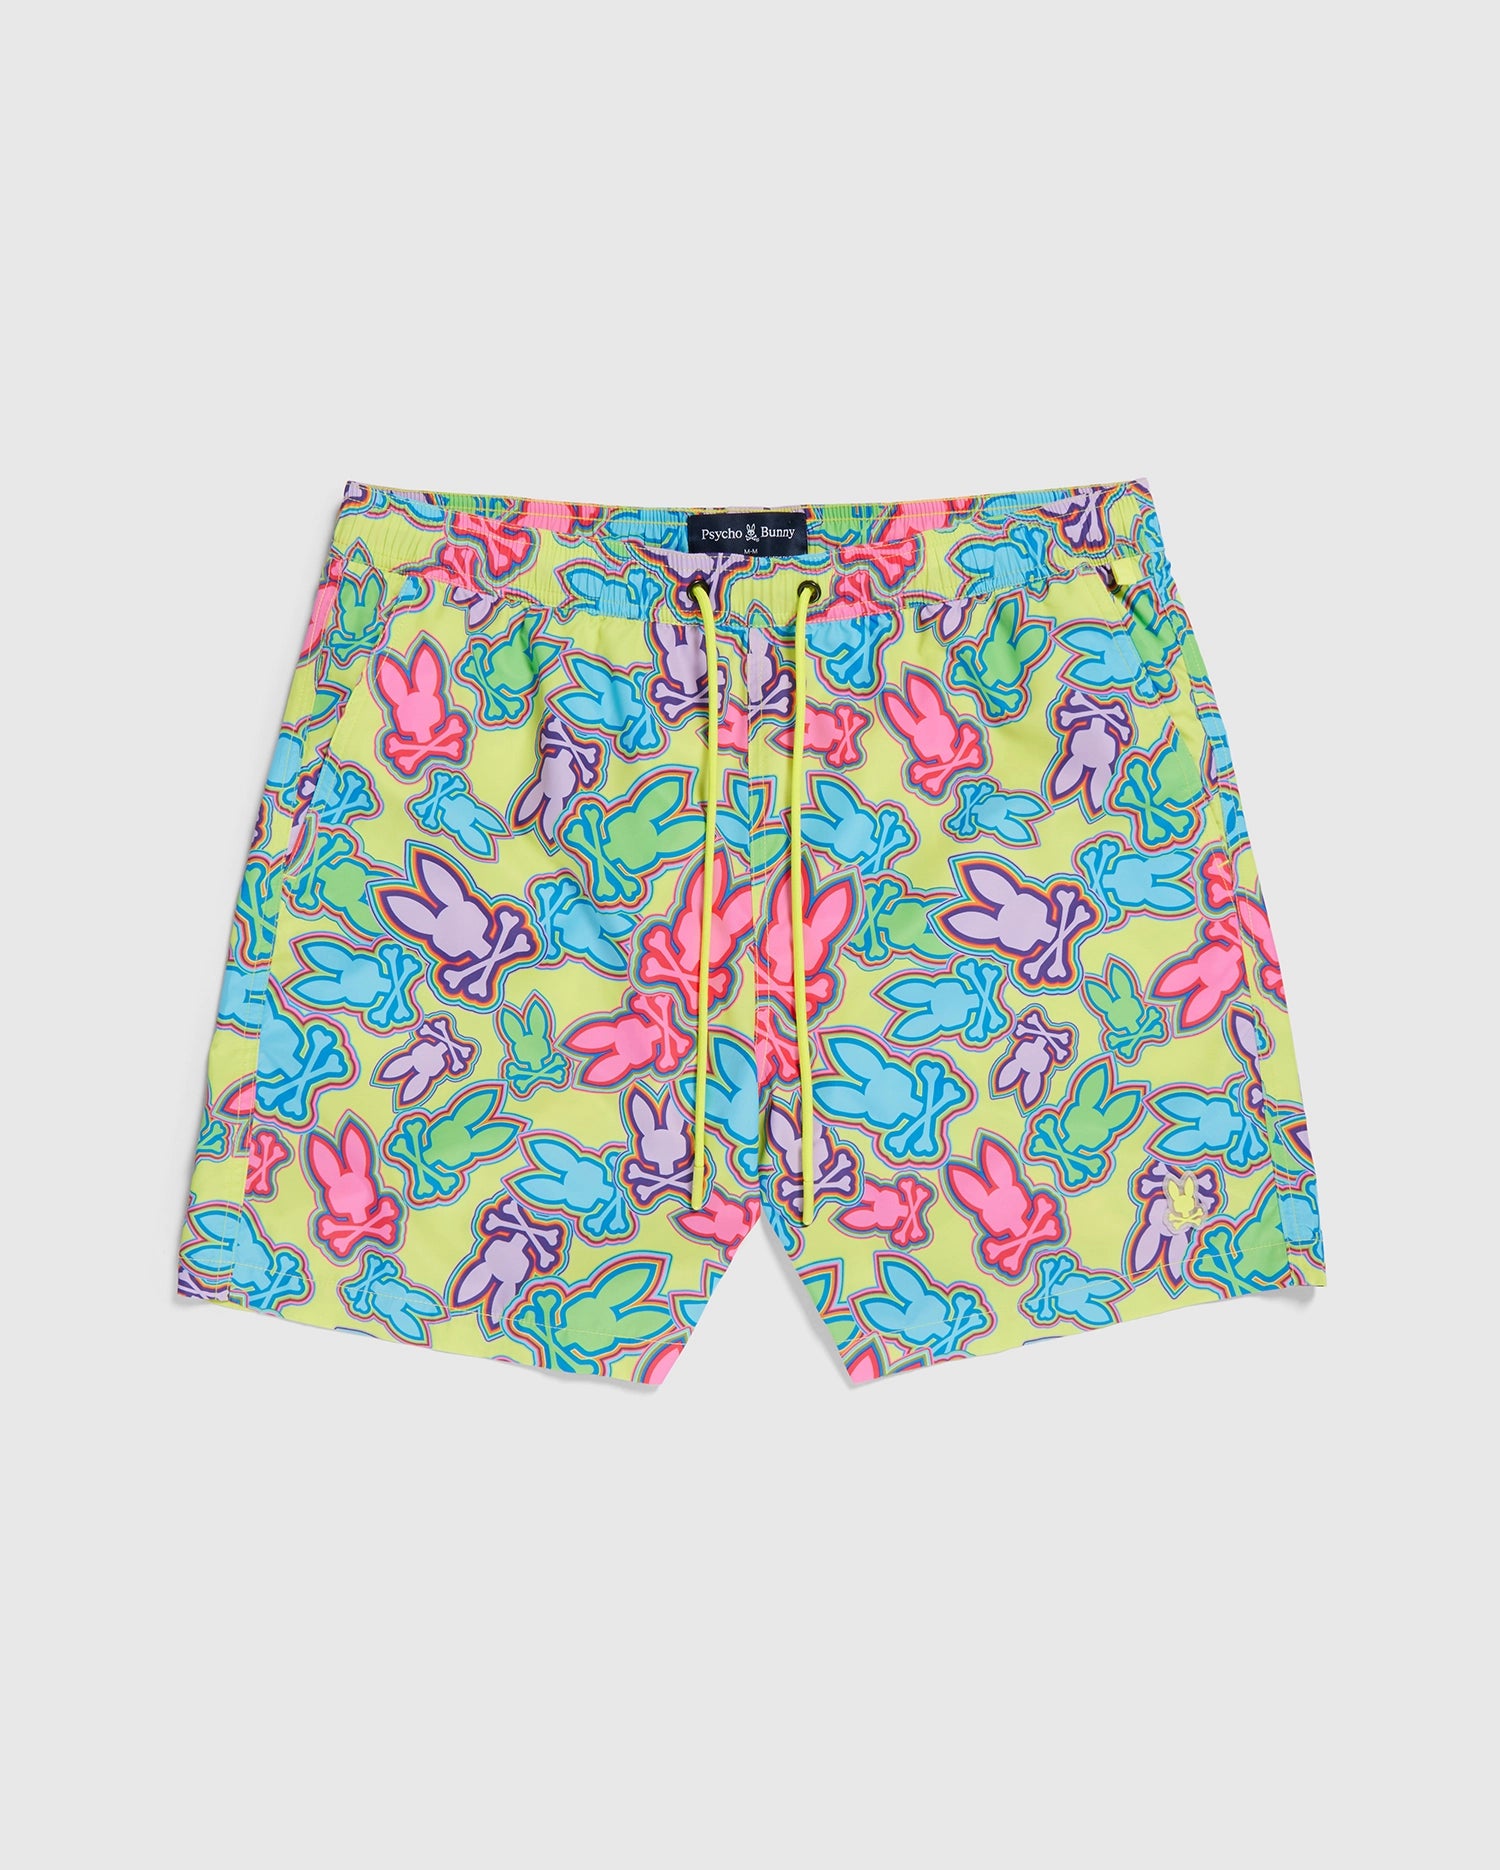 A pair of colorful swim trunks featuring a vibrant, abstract pattern of variously shaped figures in bright hues of pink, blue, green, and purple. Made from recycled polyester for a sustainability touch, the quick-dry MENS MAYBROOK LIGHTWEIGHT SWIM TRUNK - B6W119B2SW by Psycho Bunny includes an elastic waistband with a yellow drawstring and a black label at the front.